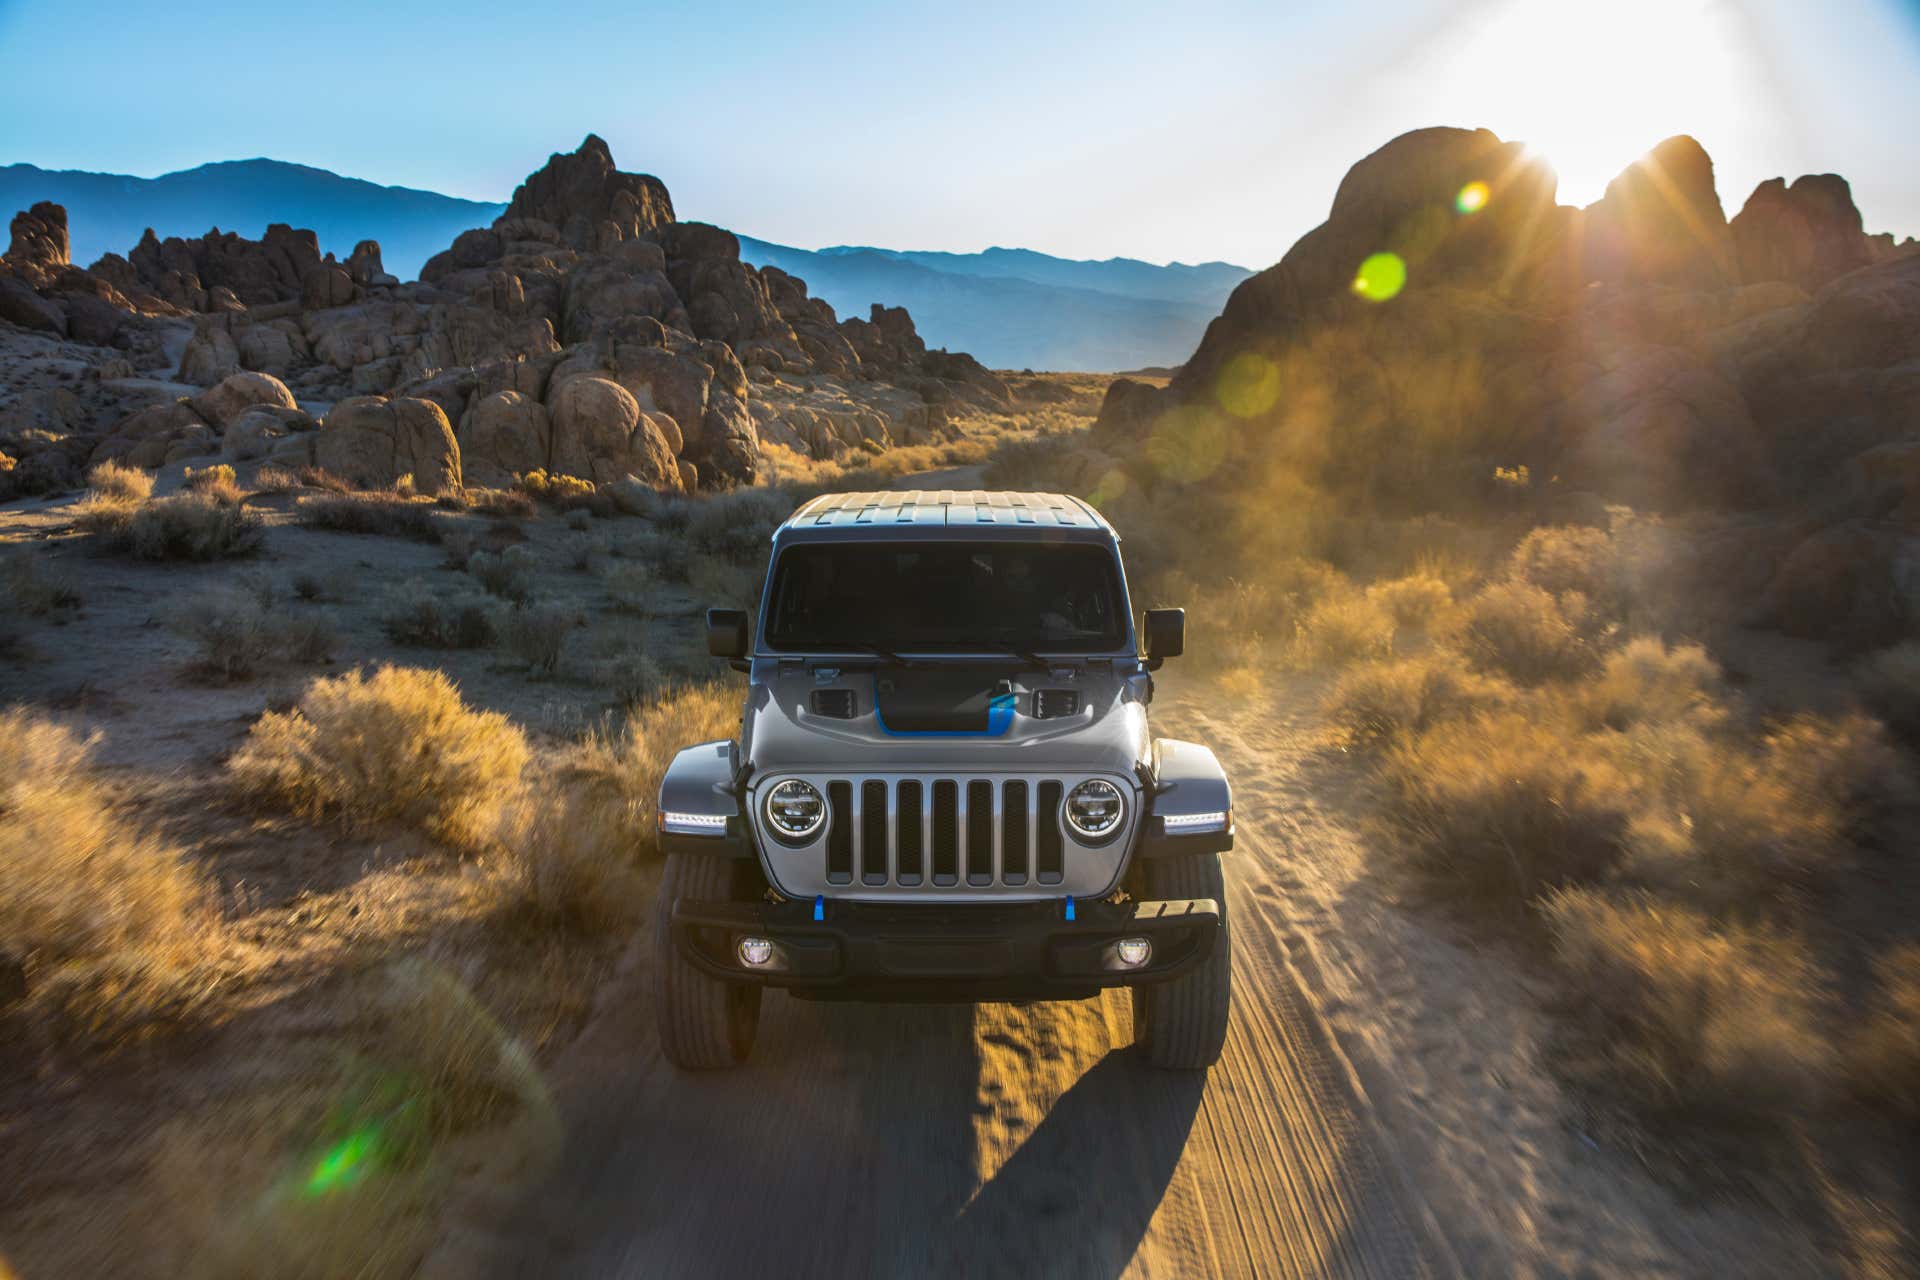 I'm Driving the 2021 Jeep Wrangler 4xe Plug-In Hybrid. What Do You Want